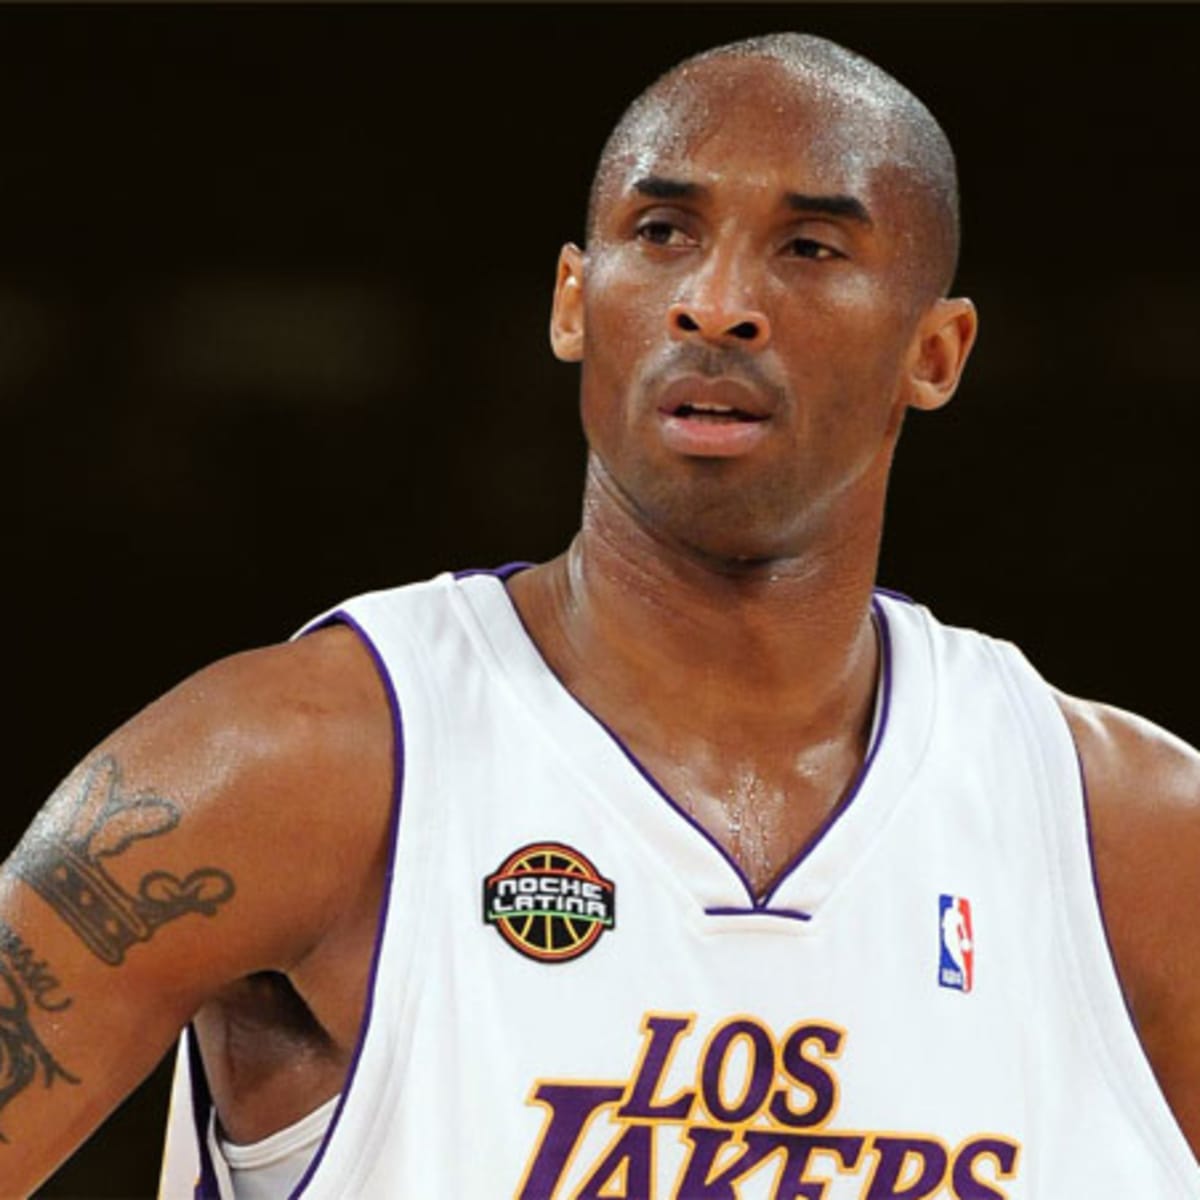 Last time I was intimidated was when I was 6 years old in karate class”:  When Kobe Bryant delved deep into his 'Mamba Mentality' and how he never  got intimidated - The SportsRush